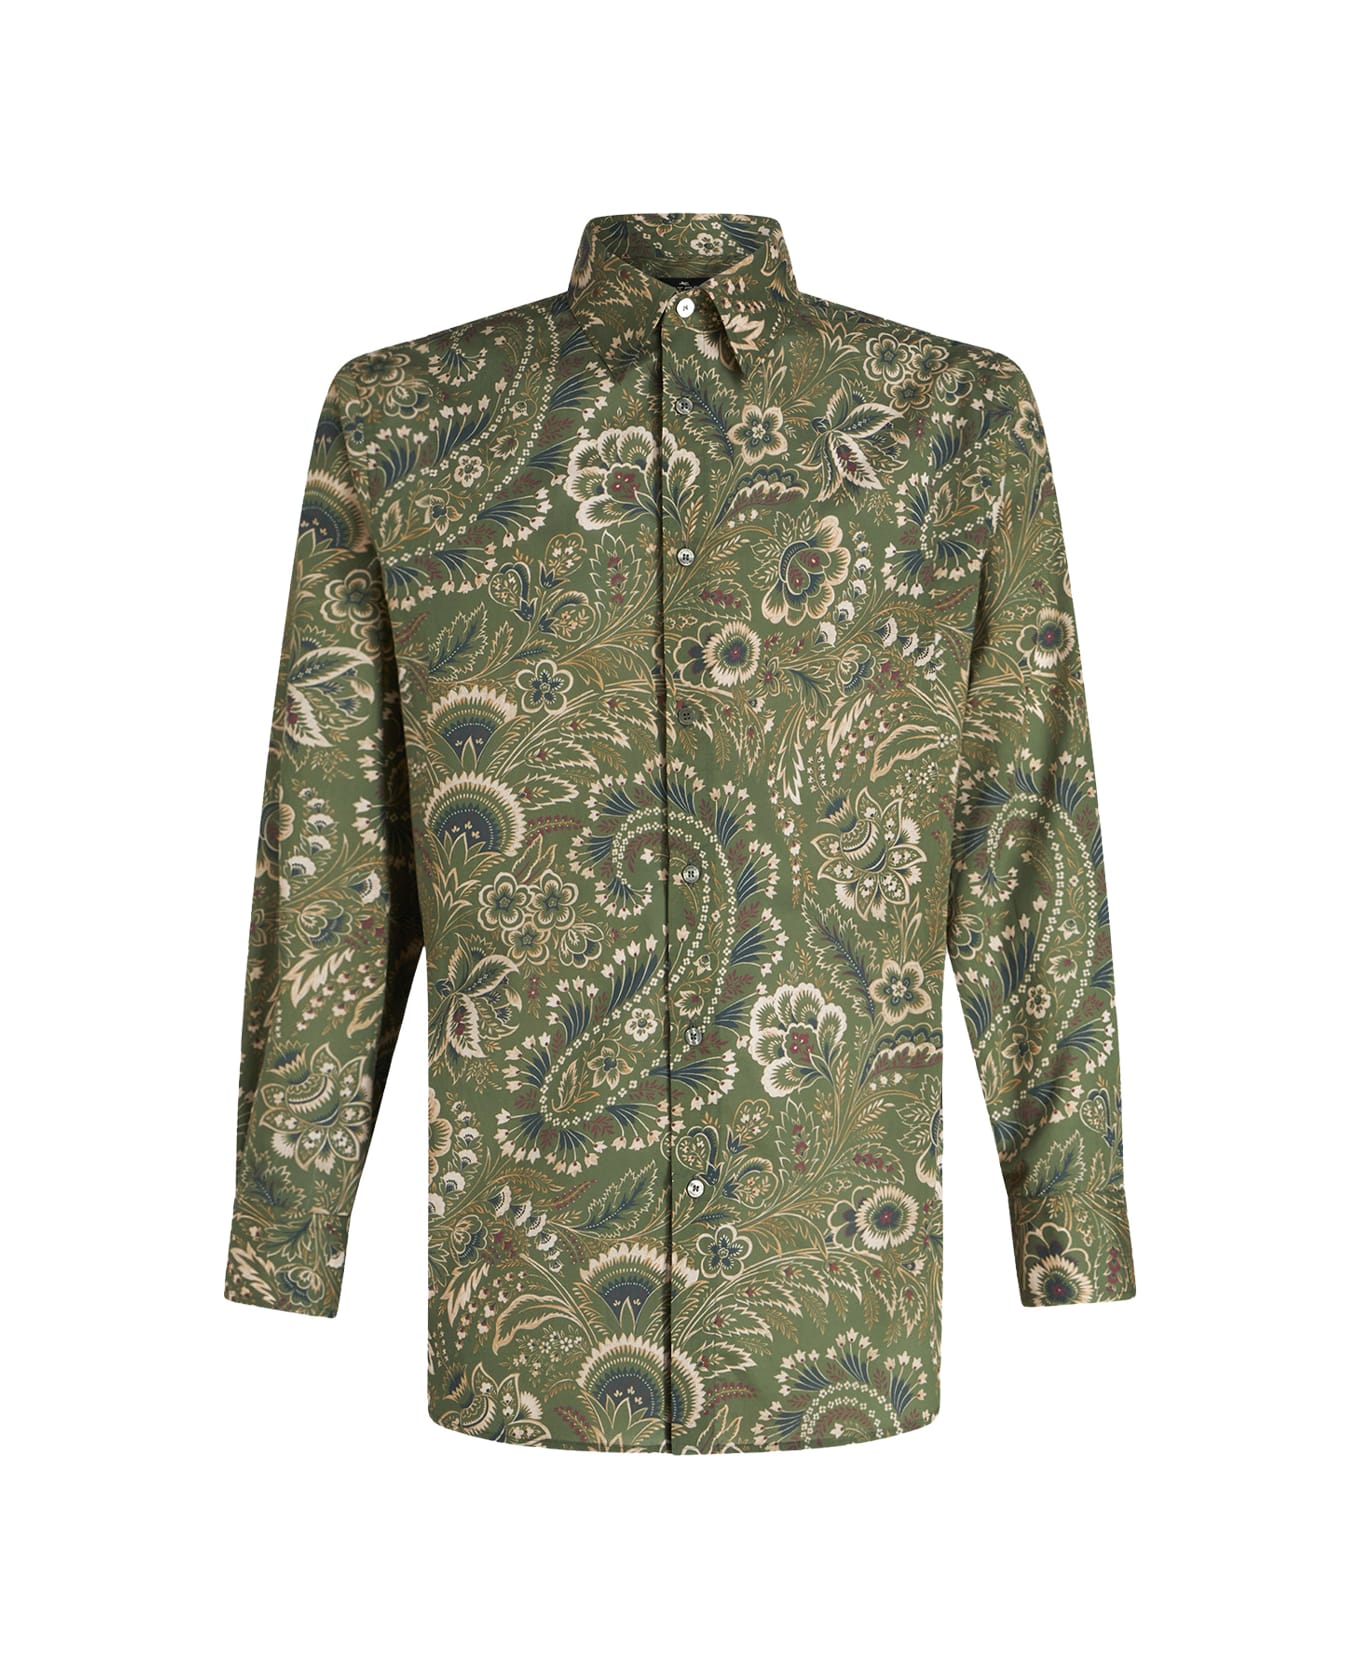 Etro Green Cotton Shirt With Paisley Floral Pattern - Green シャツ